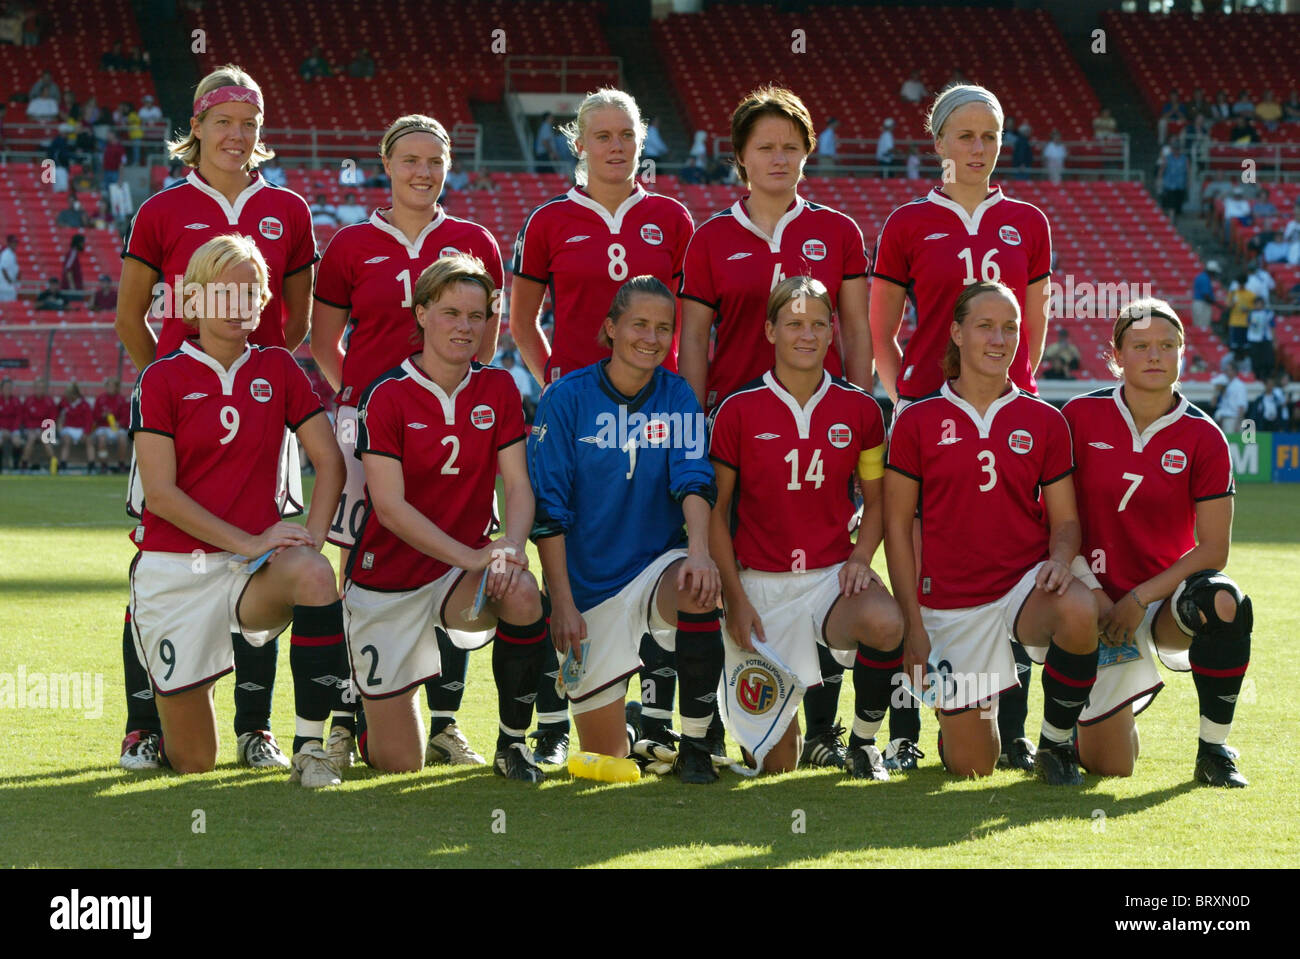 The Norway starting eleven lines up prior to a 2003 Women's World Cup soccer match against Brazil (see description for details). Stock Photo